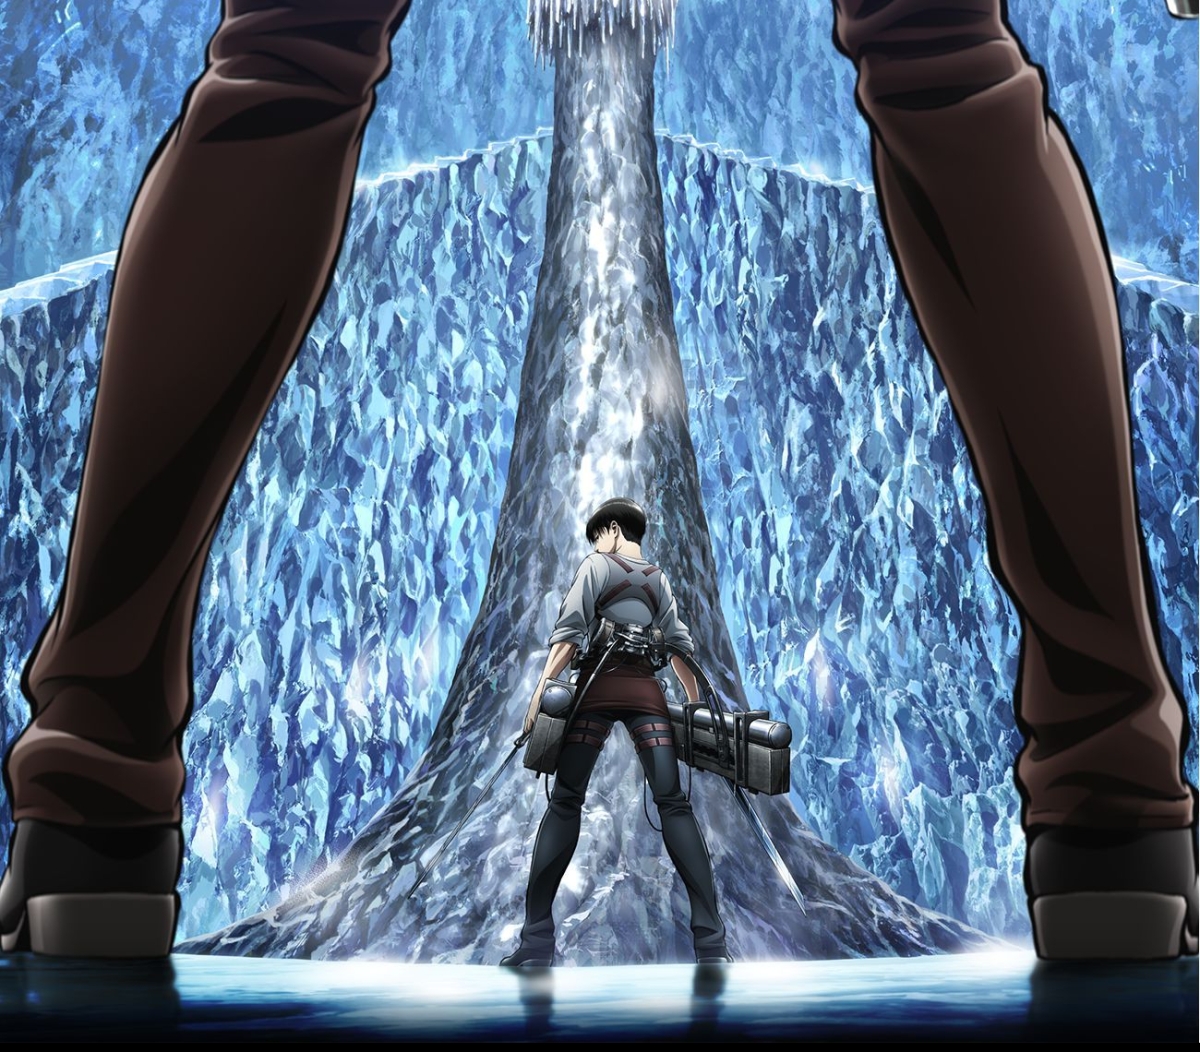 Attack on Titan Season 3 Episode 12 Review: Night of the Battle to